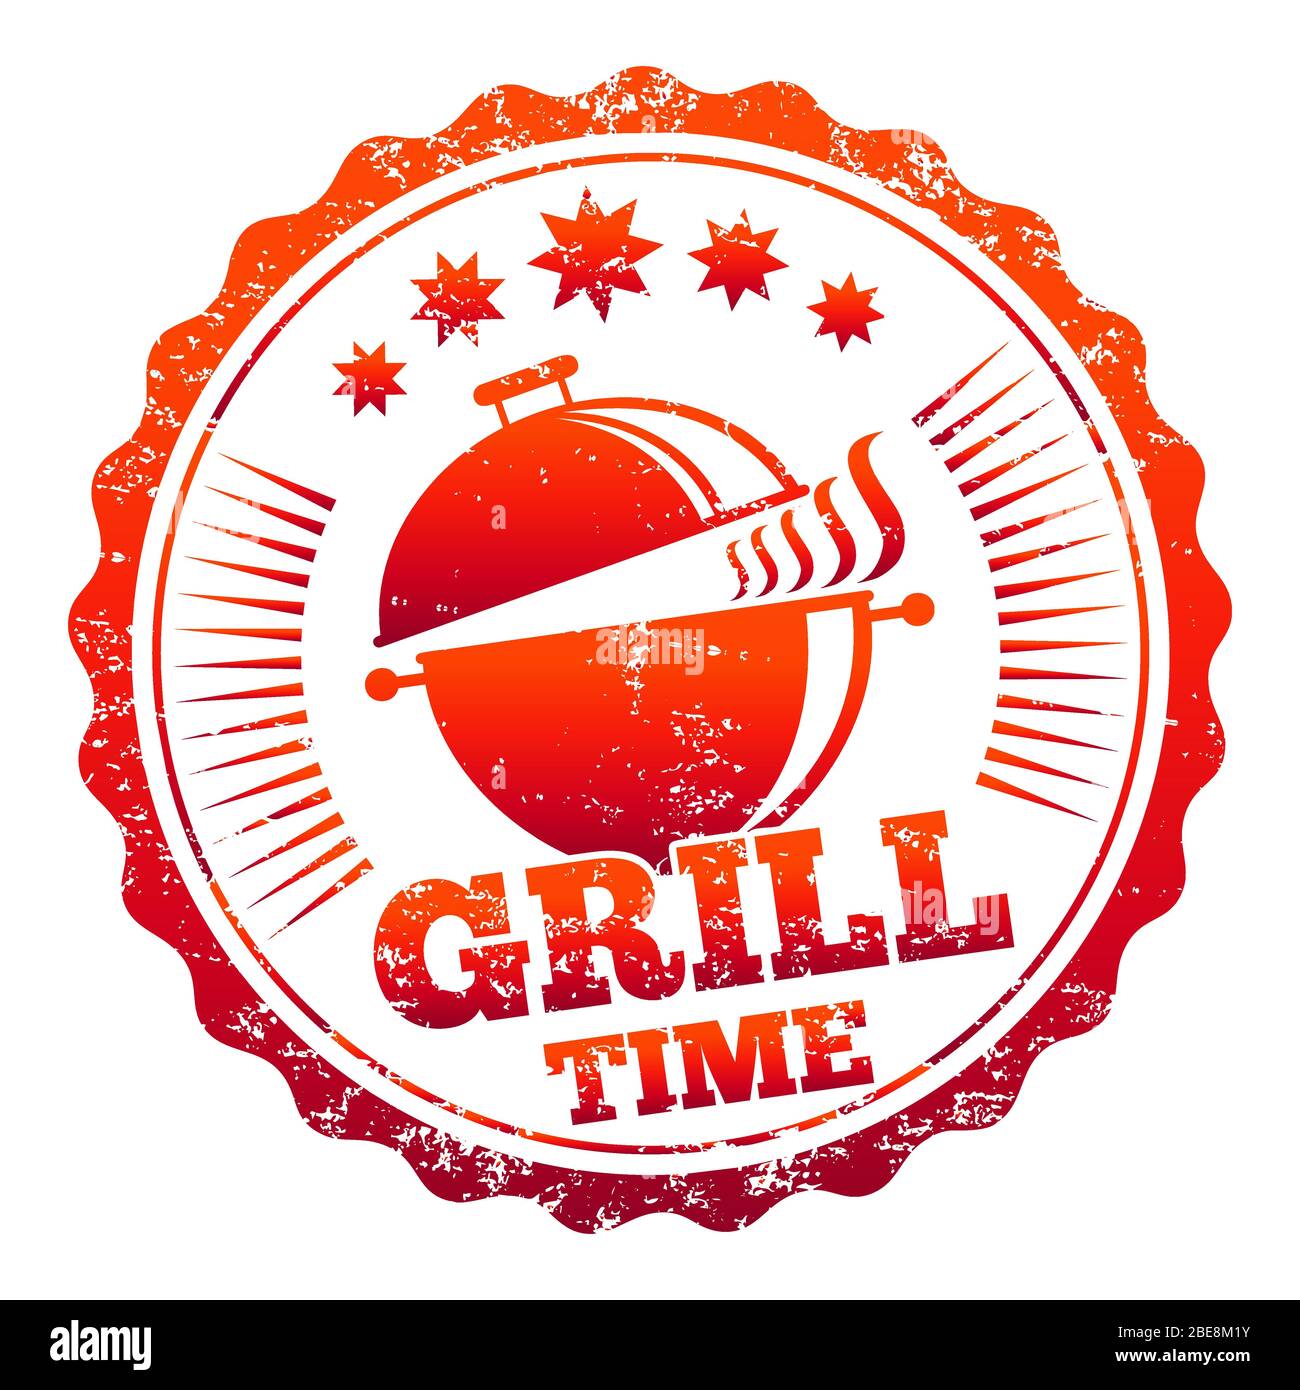 Grill time vector label design isolated on white background Stock Vector